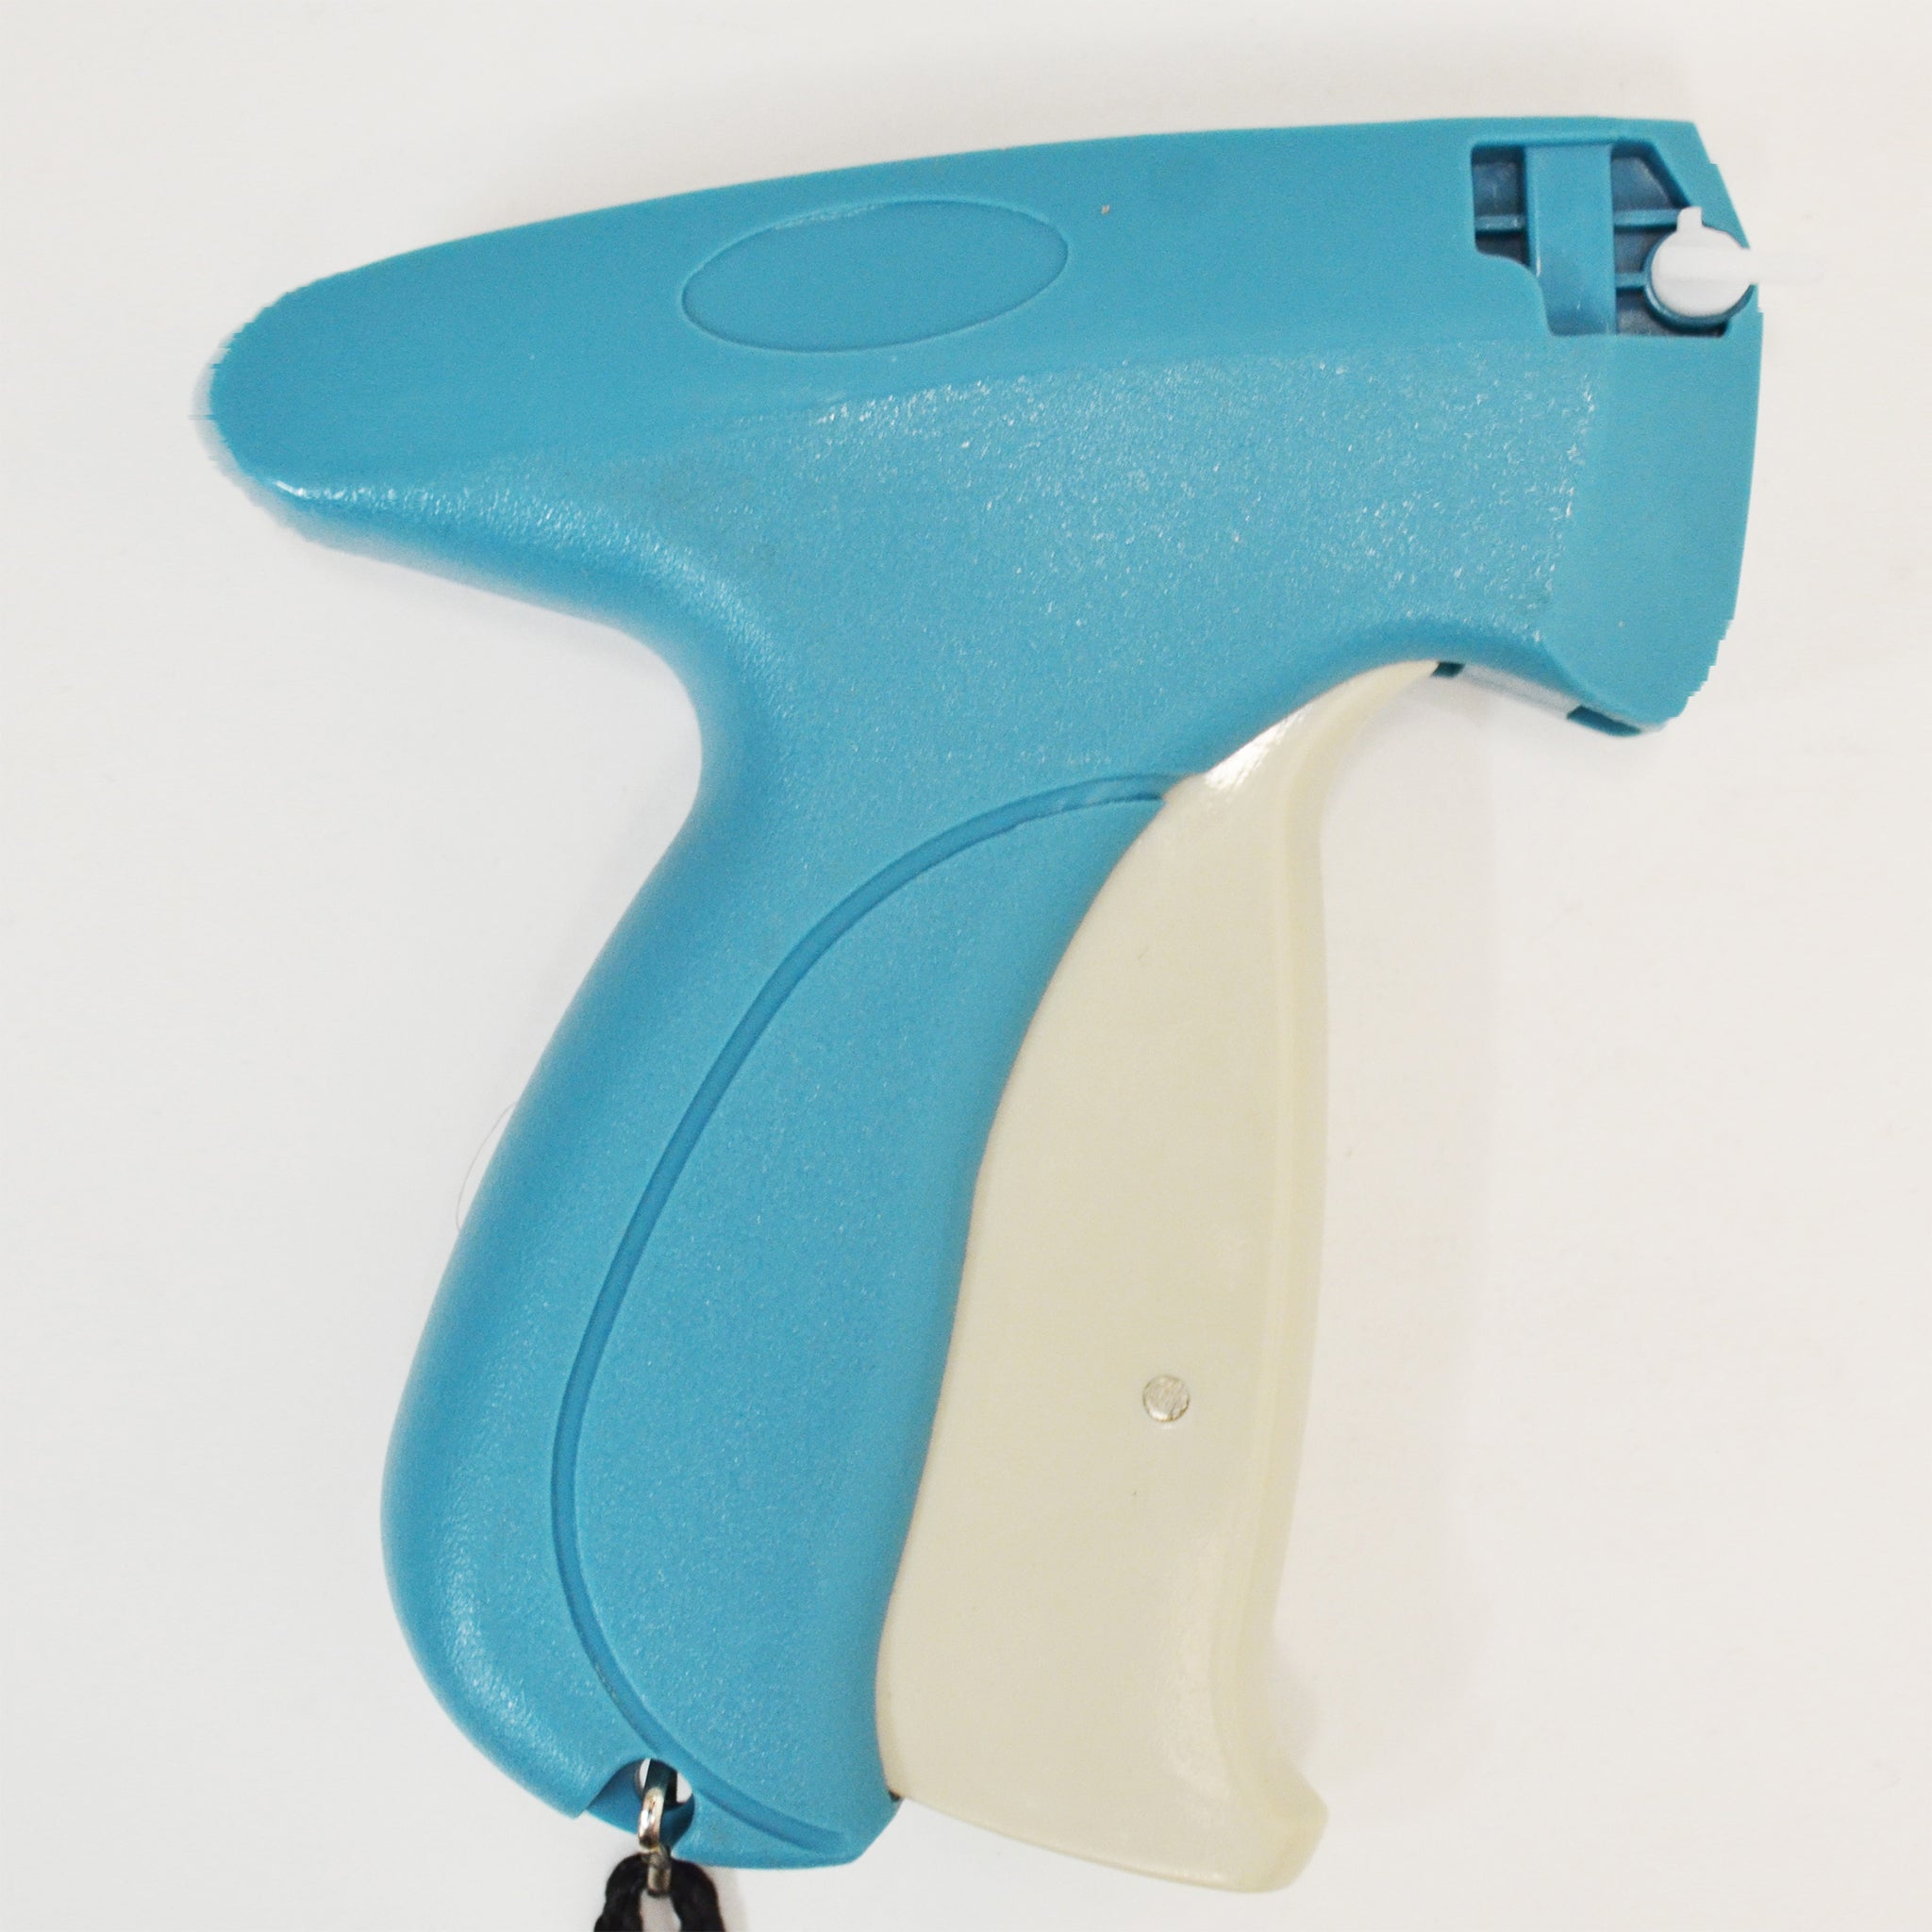 Buy Stitching Gun for Tagging of Goods